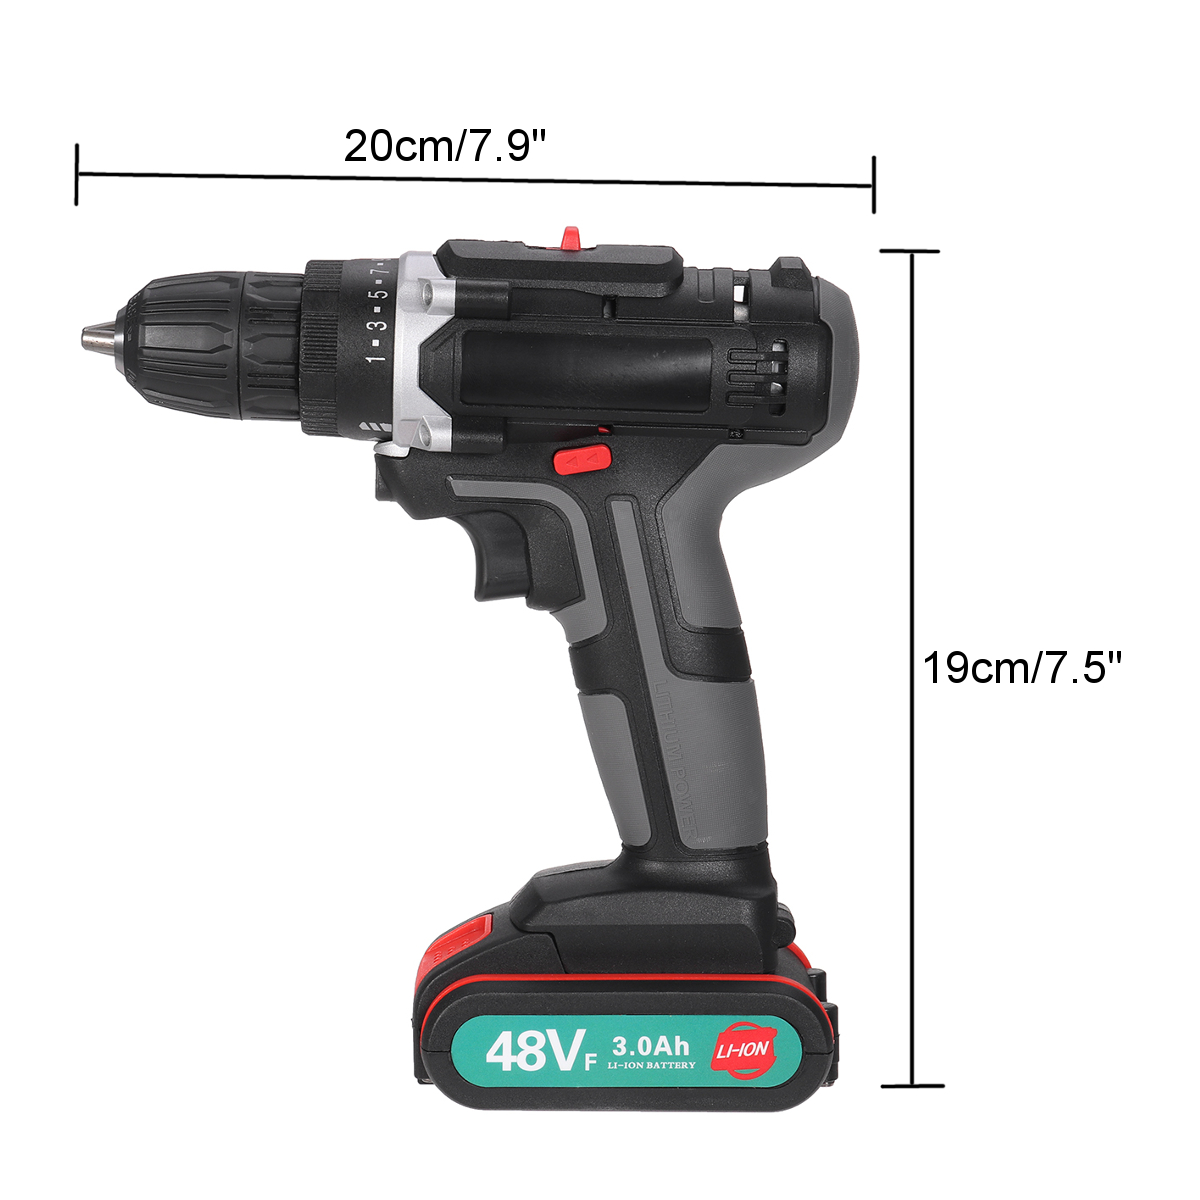 520Nm-48V-Cordless-Electric-Drill-Driver-38-Chuck-Rechargeable-Power-Drill-W-2pcs-Battery-1752199-12